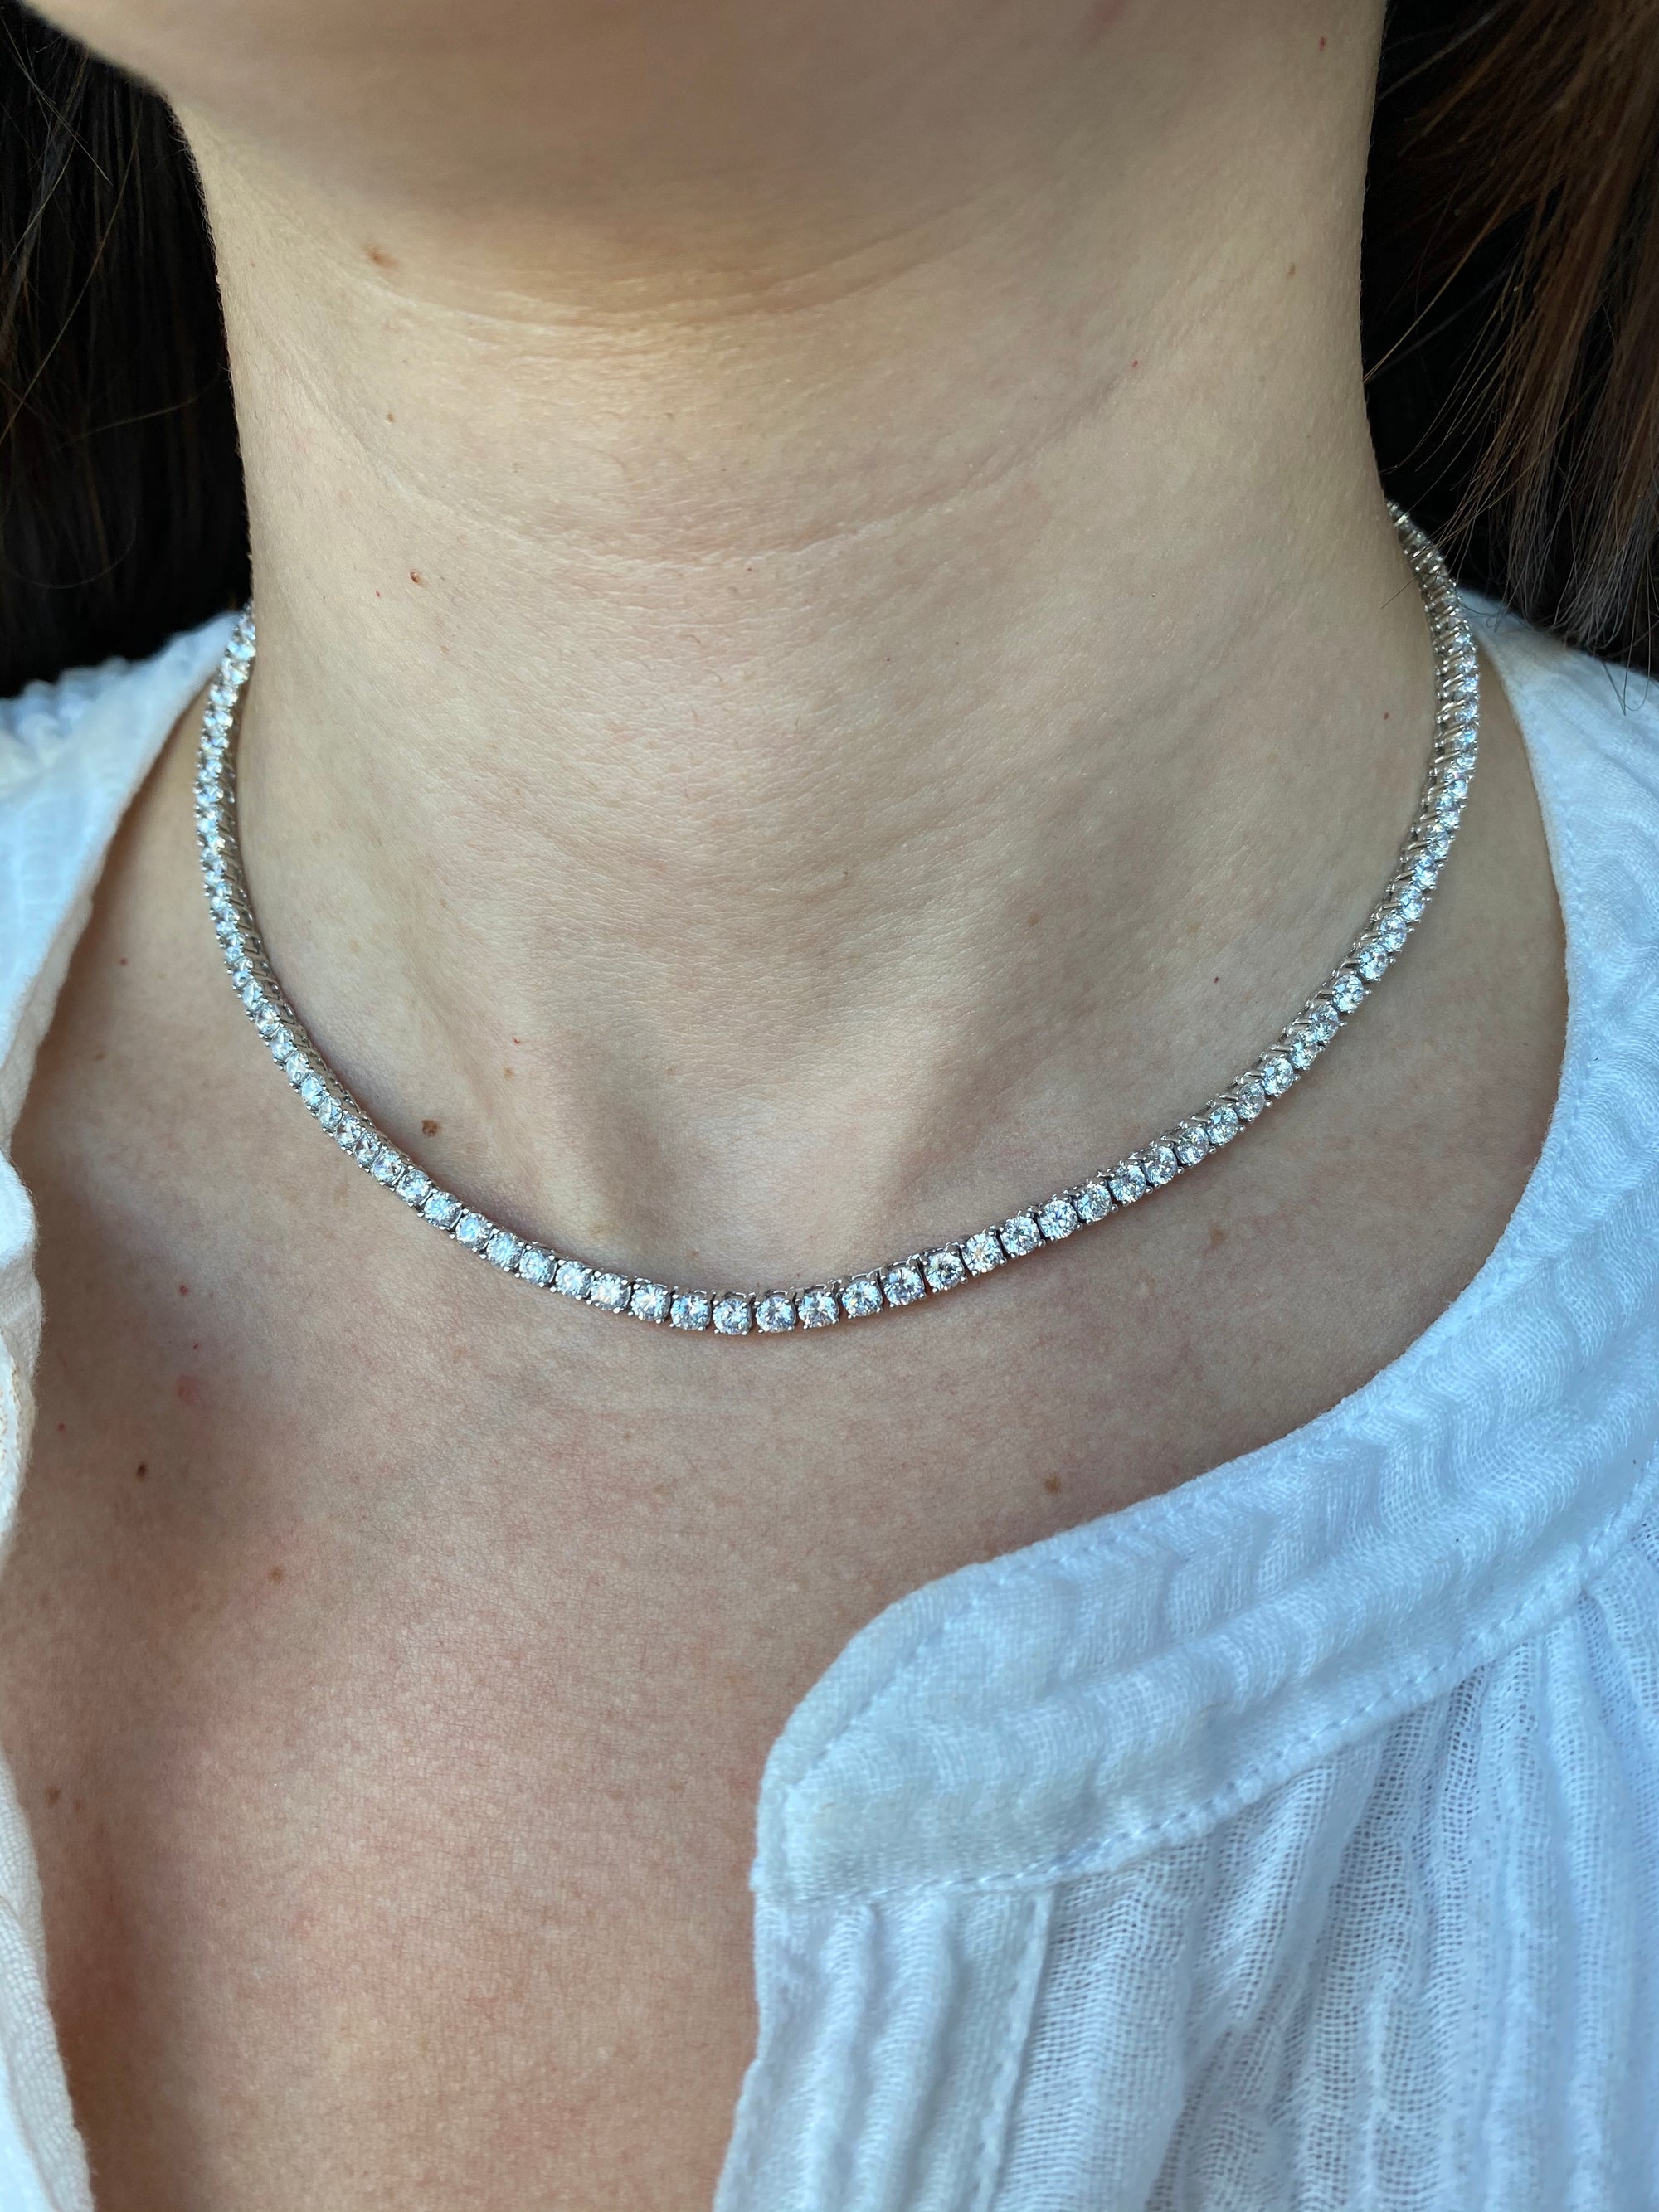 Classic Tennis Necklace